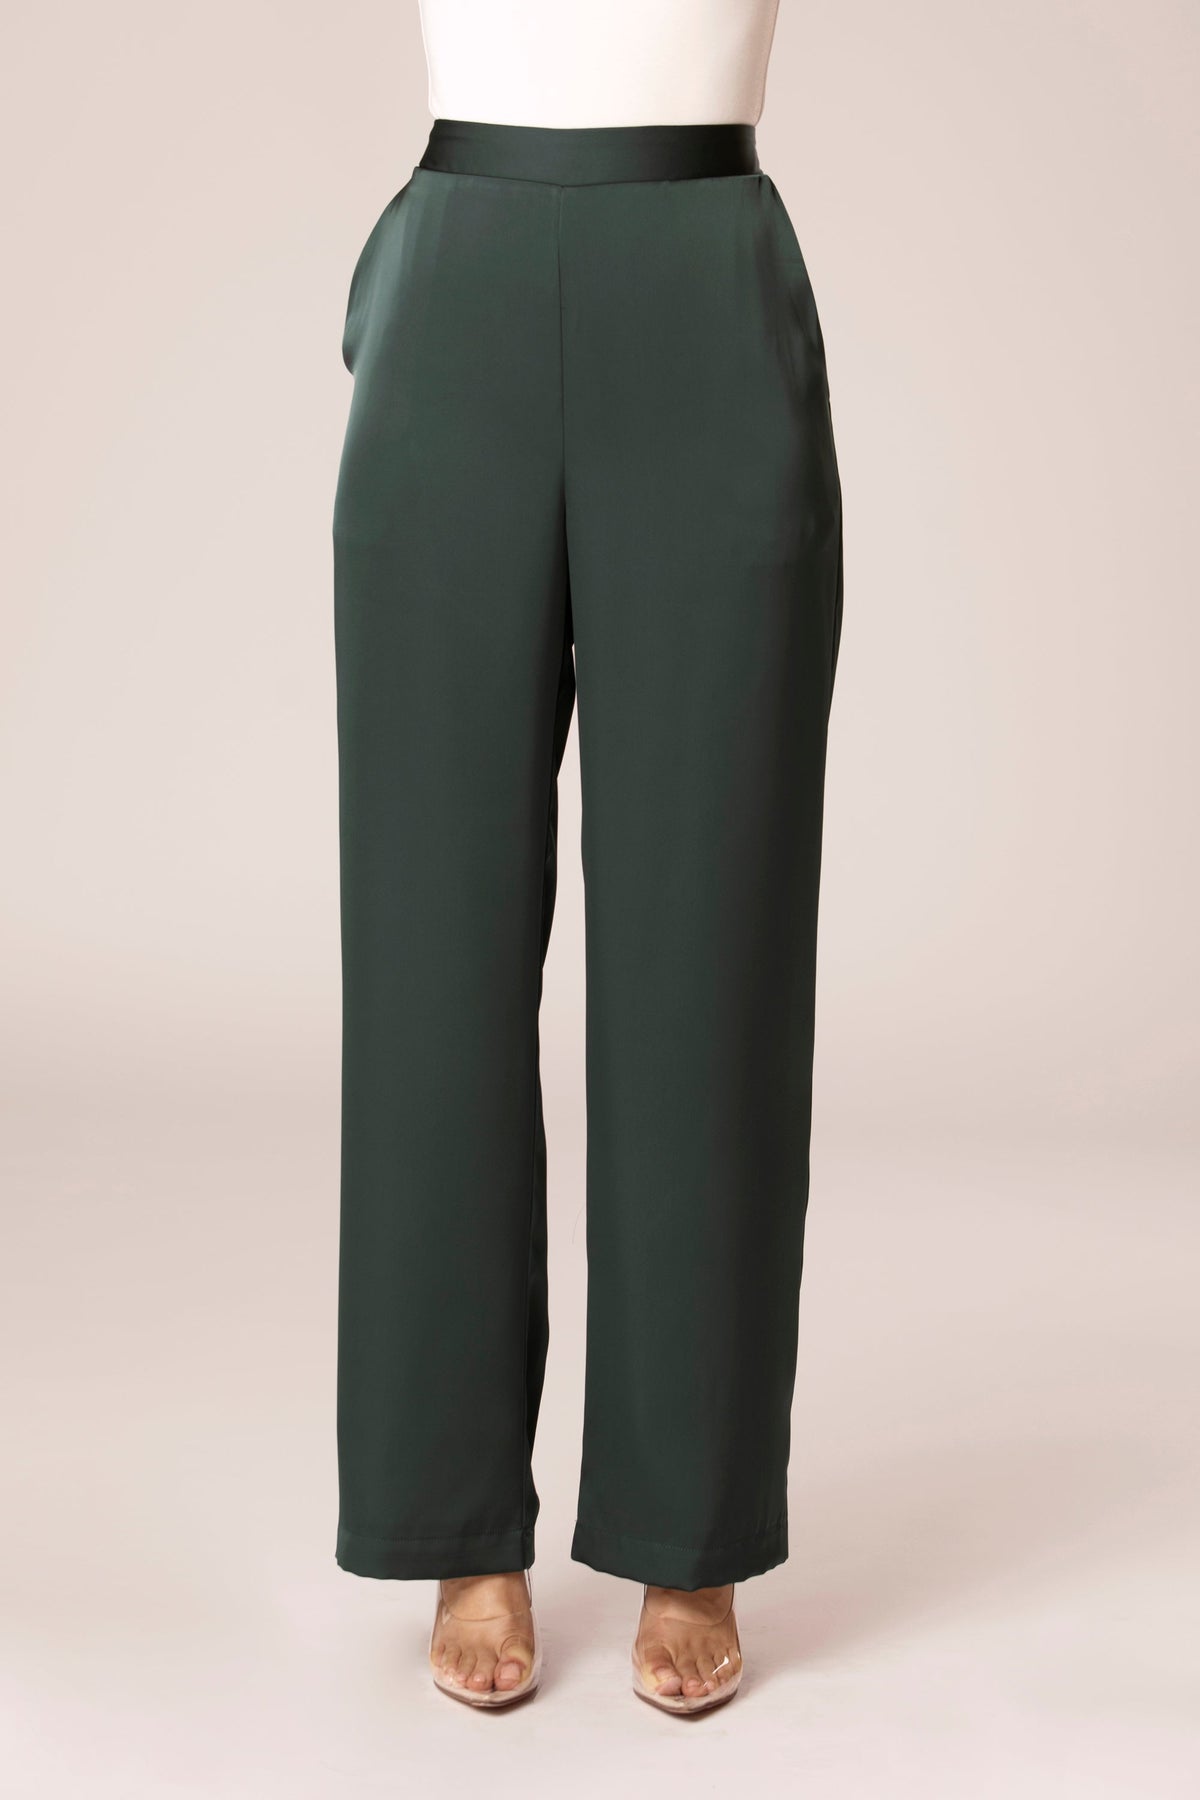 Satin High Rise Trousers - Dark Emerald Veiled Collection 